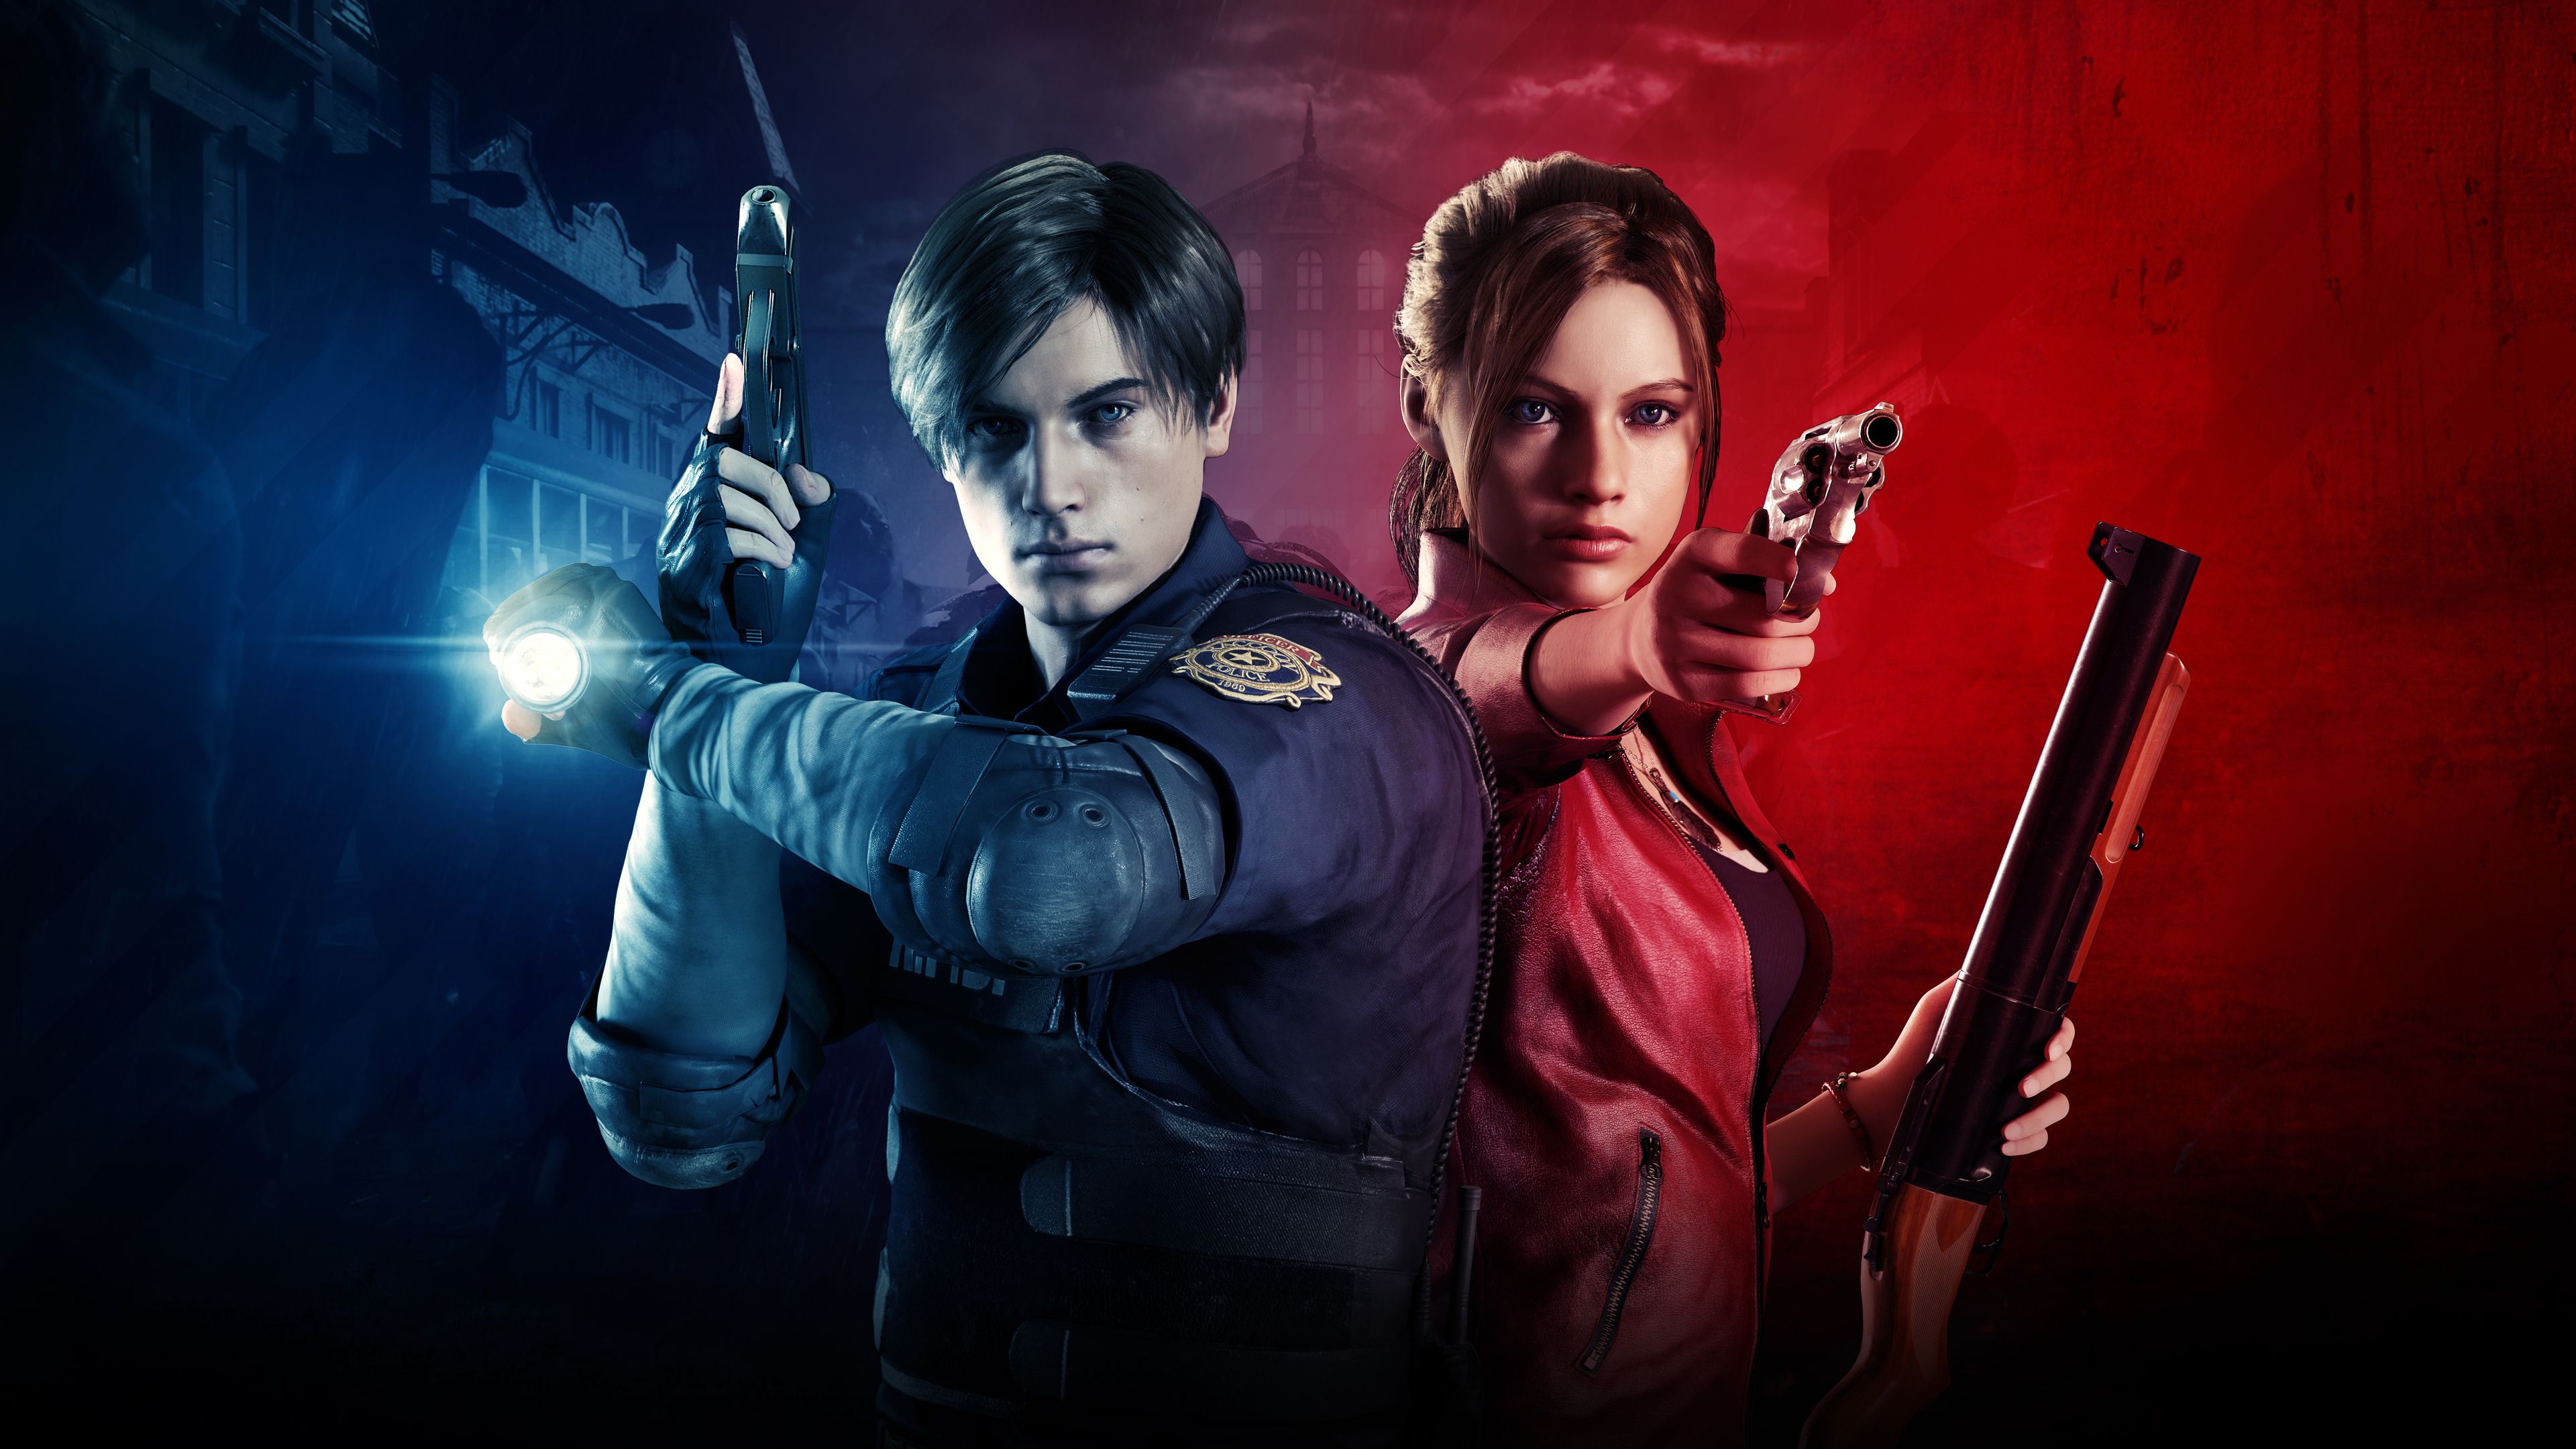 Wallpaper 4k Claire Redfield And Leon Resident Evil 2 4k 2019 Games Wallpaper, 4k Wallpaper, Games Wallpaper, Hd Wallpaper, Resident Evil 2 Wallpaper